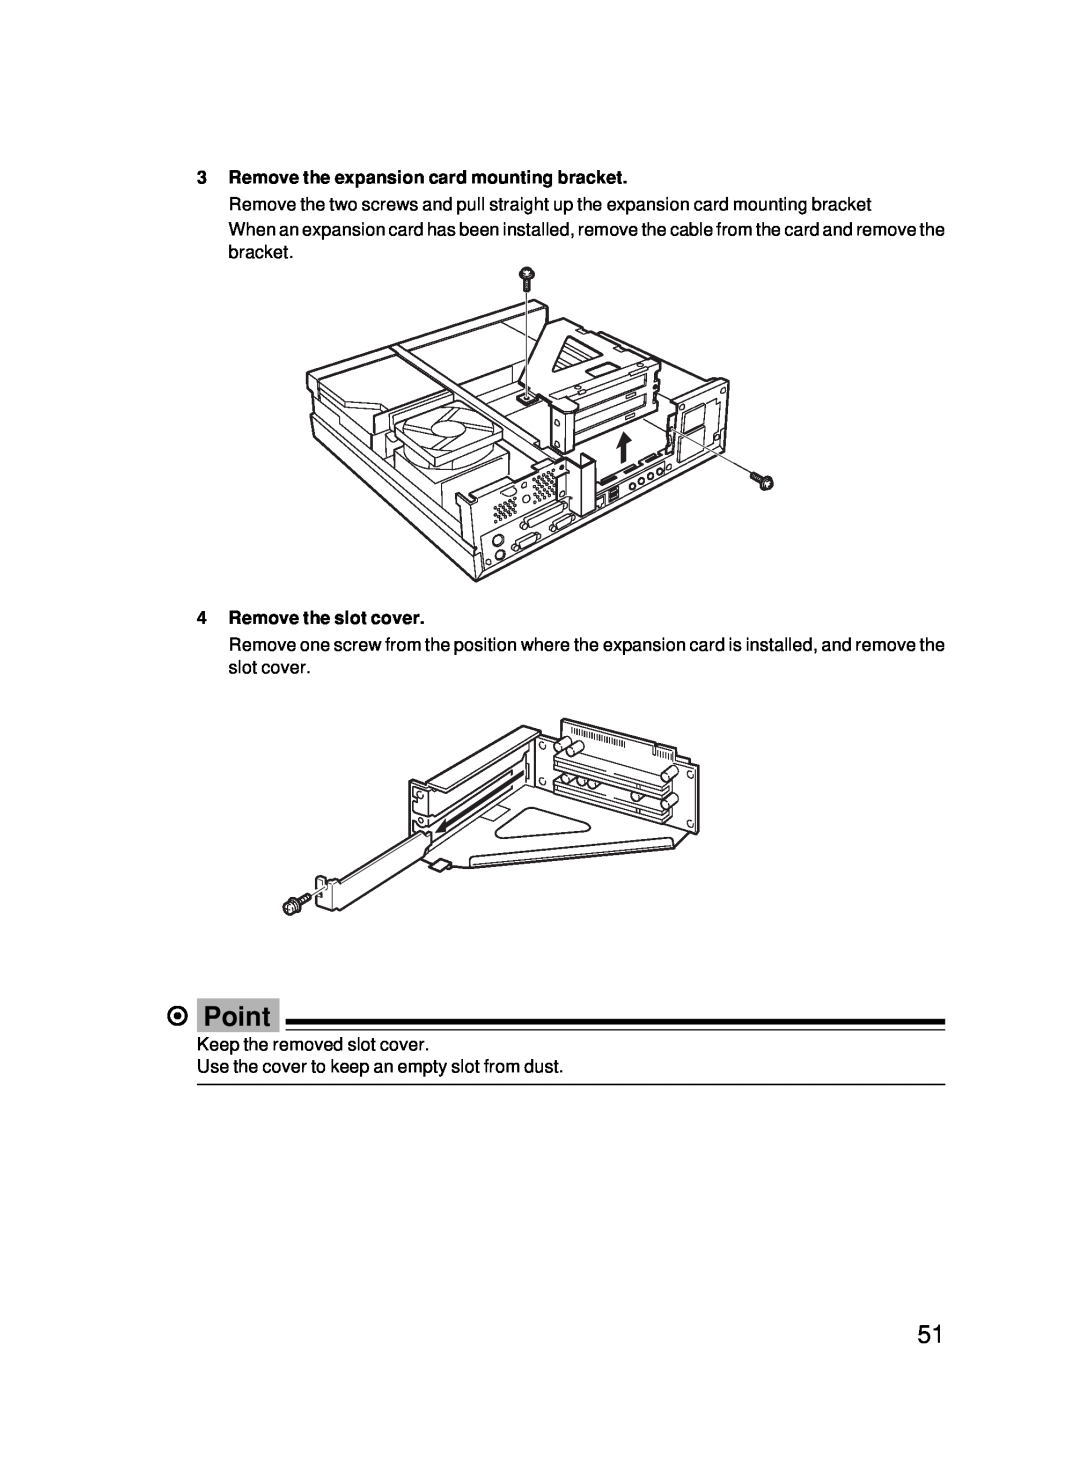 Fujitsu 5000 user manual Point, Remove the expansion card mounting bracket, Remove the slot cover 